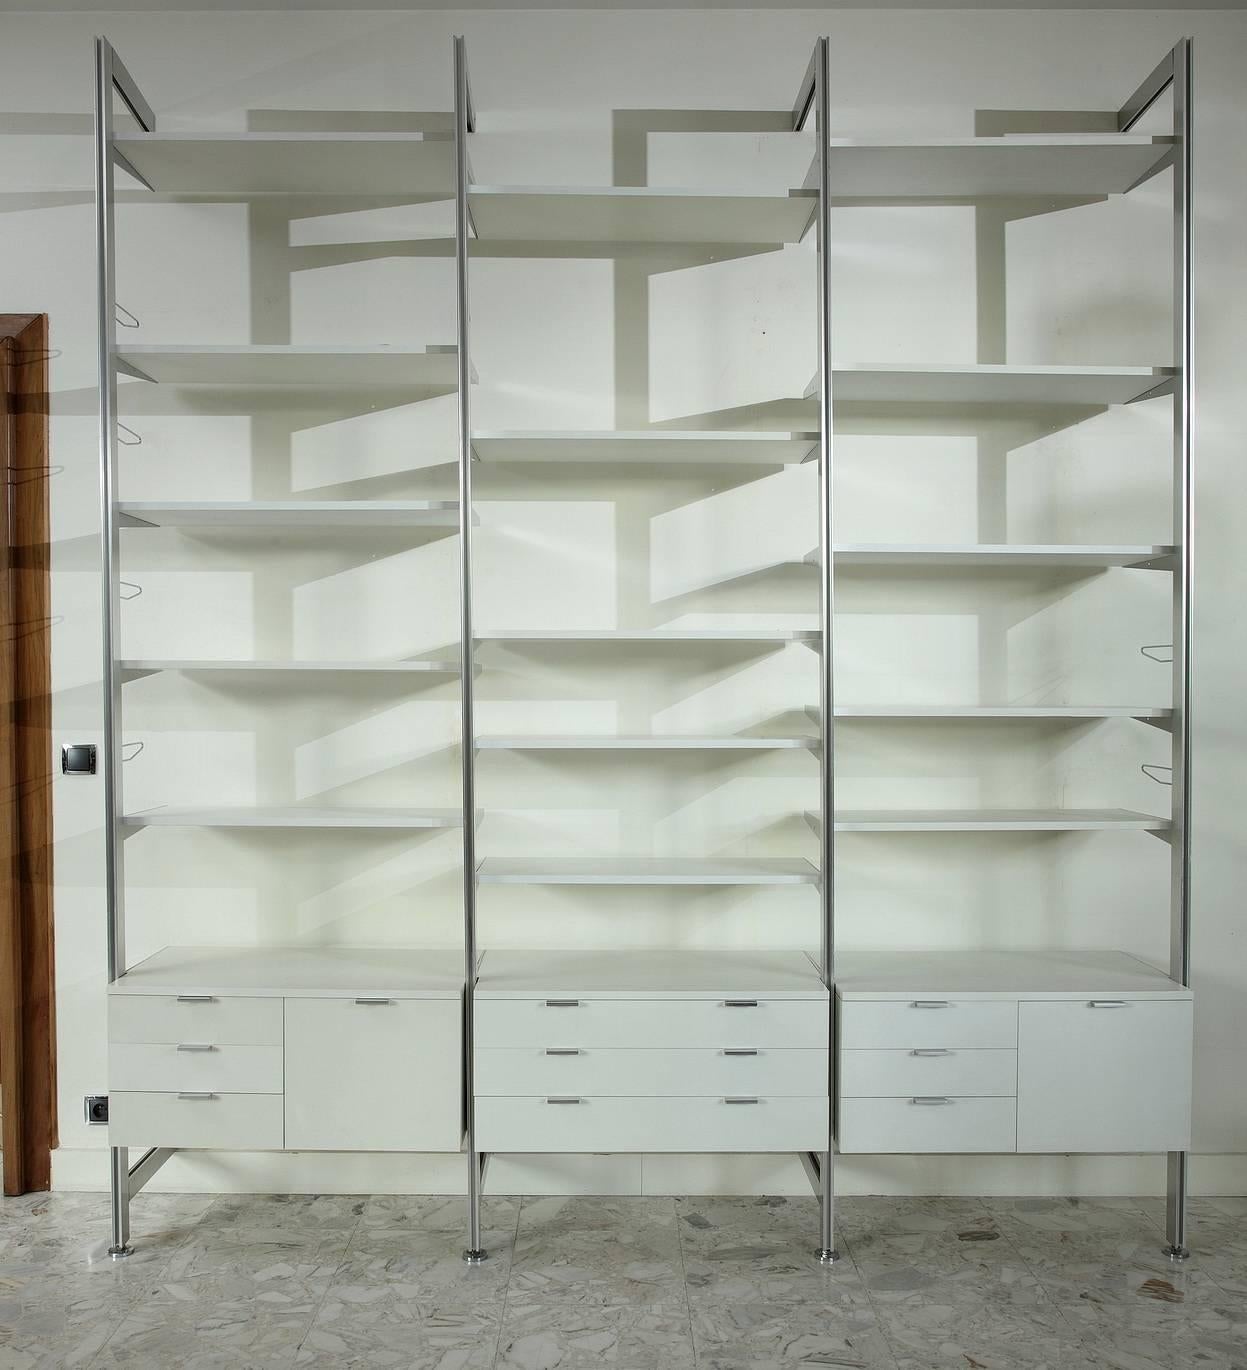 CSS white lacquered wood and stainless steel modular wall unit designed by George Nelson for Herman Miller in 1957 and edited between 1959 and 1973. It is composed of 3 vertical ladders, 15 shelves and 3 storage compartments with sliding drawers.